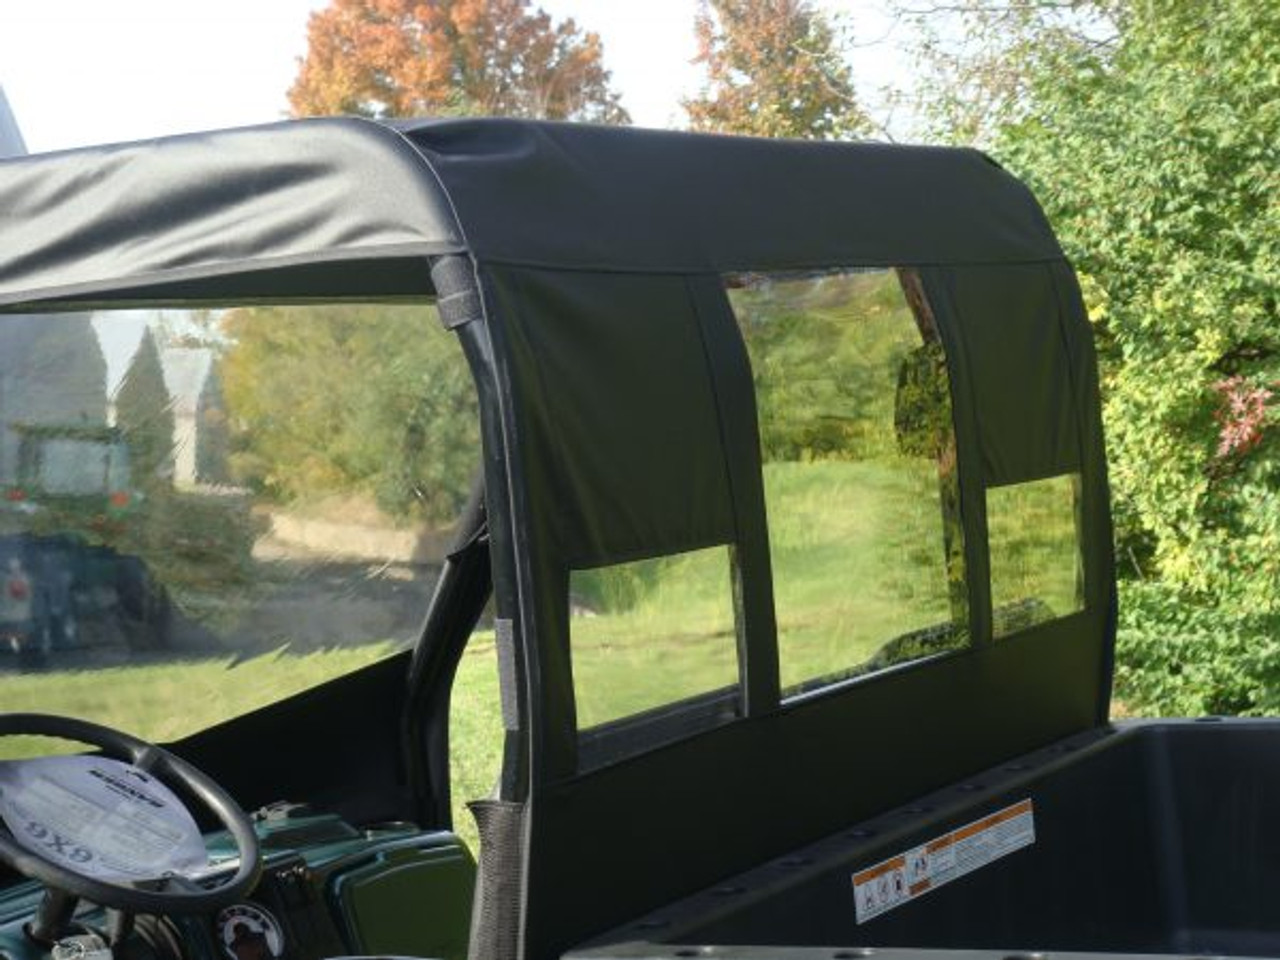 3 Star side x side Polaris Ranger 500 and 700 vinyl windshield roof and rear window rear angle view